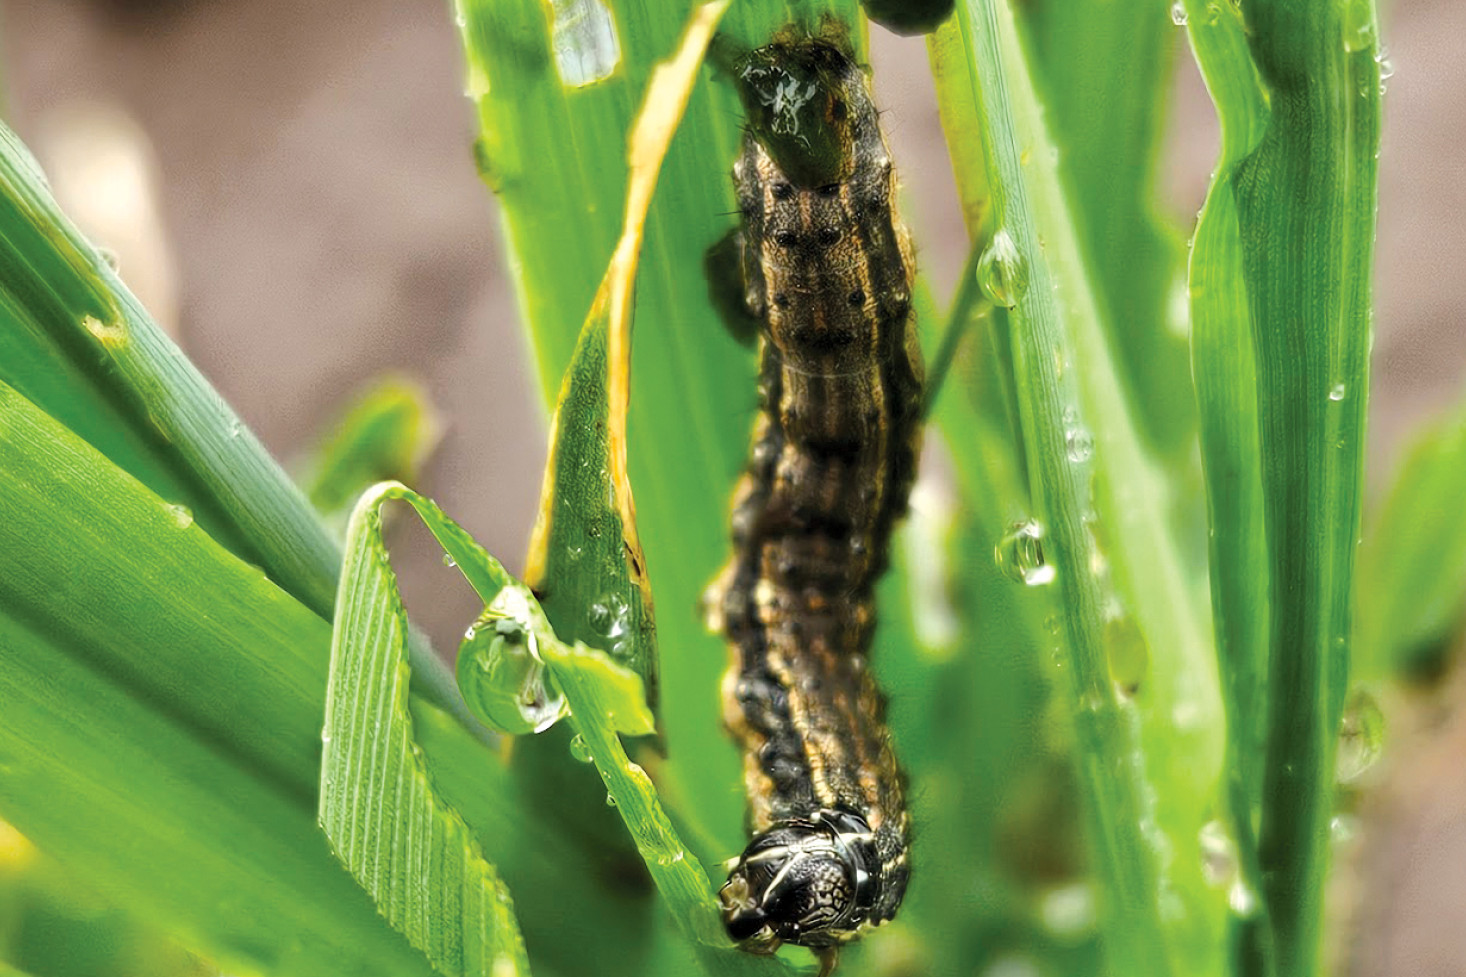 Fall armyworm causing substantial damage in oats. Photo, Trevor Volp